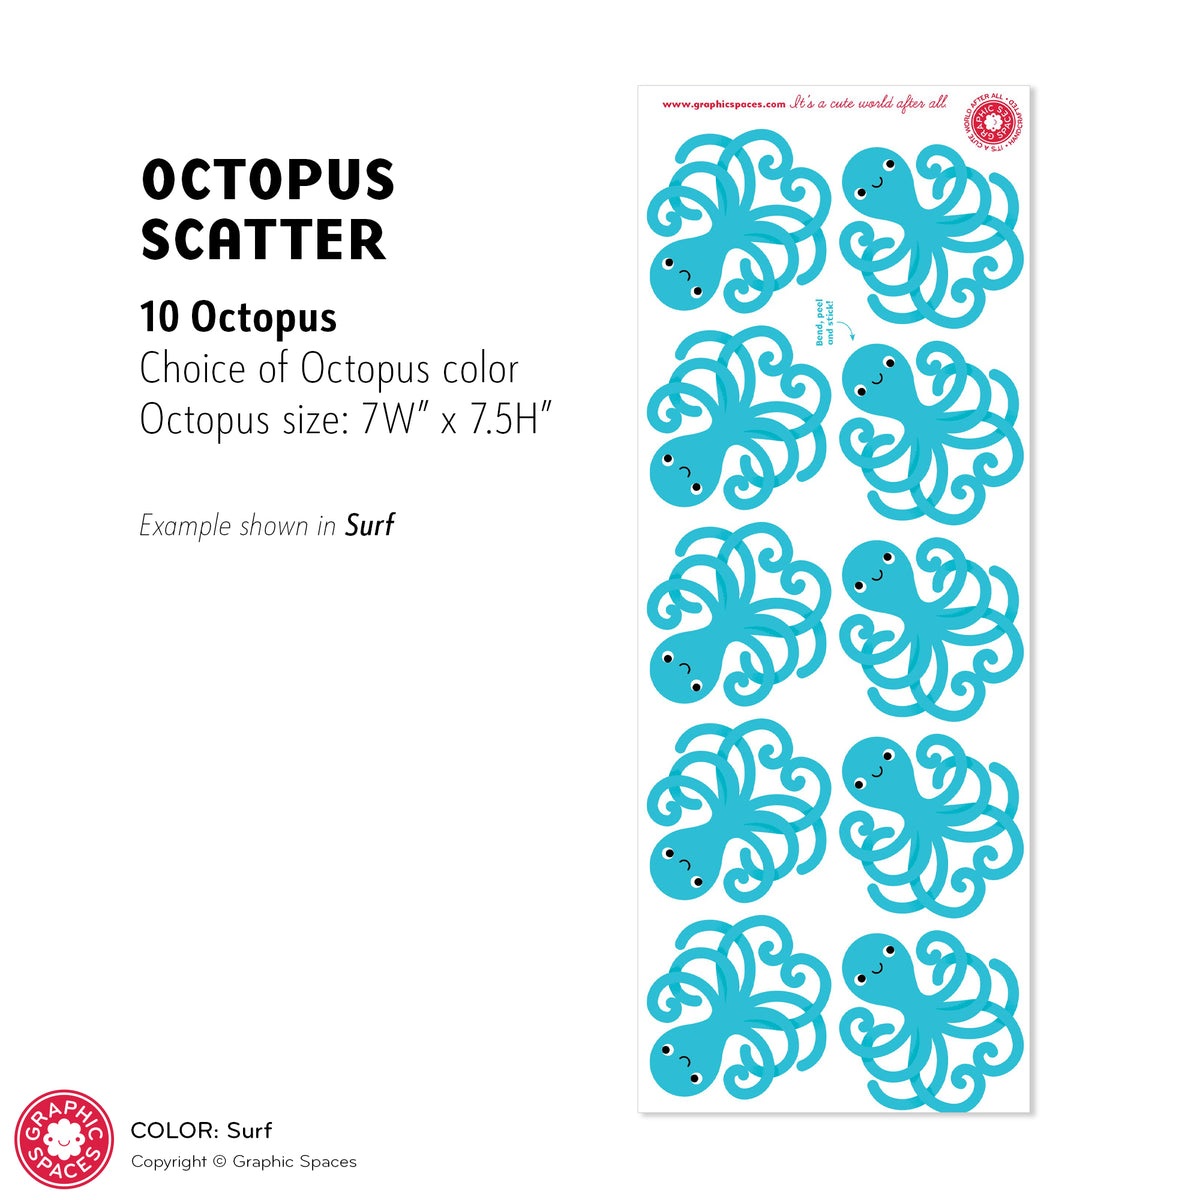 Octopus Scatter Fabric Wall Decals - Pack of 10